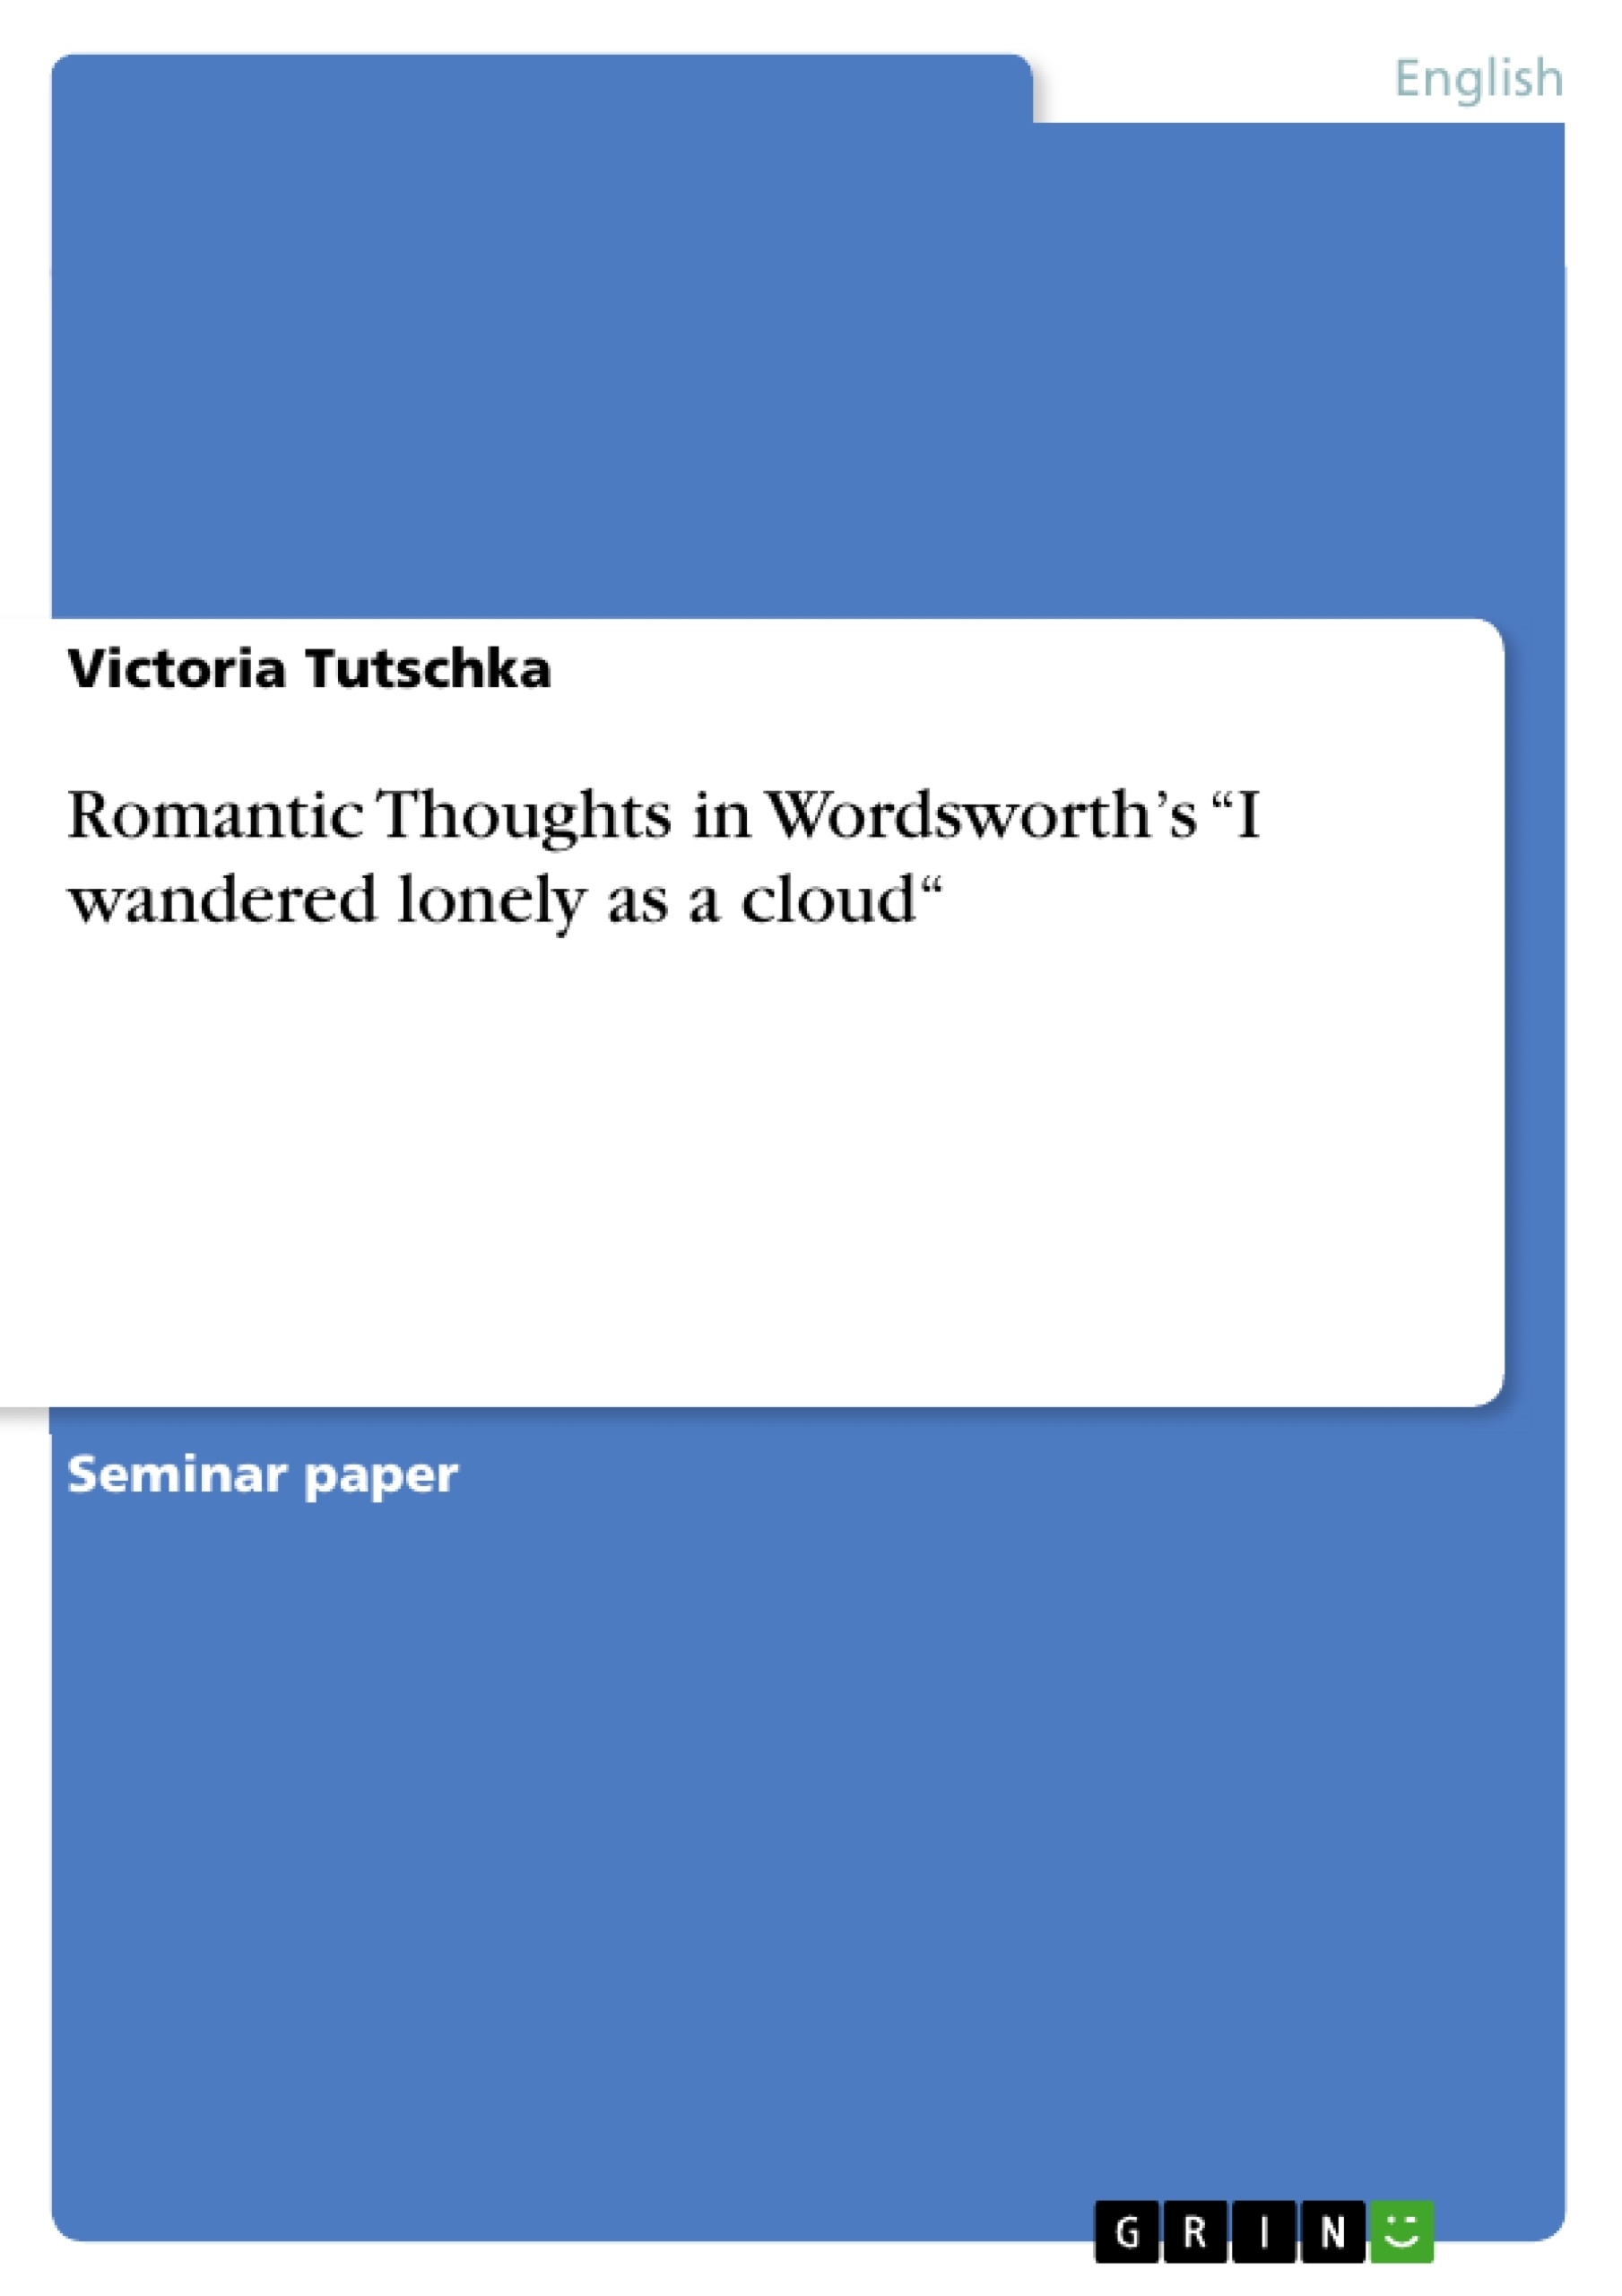 Título: Romantic Thoughts in Wordsworth’s  “I wandered lonely as a cloud“